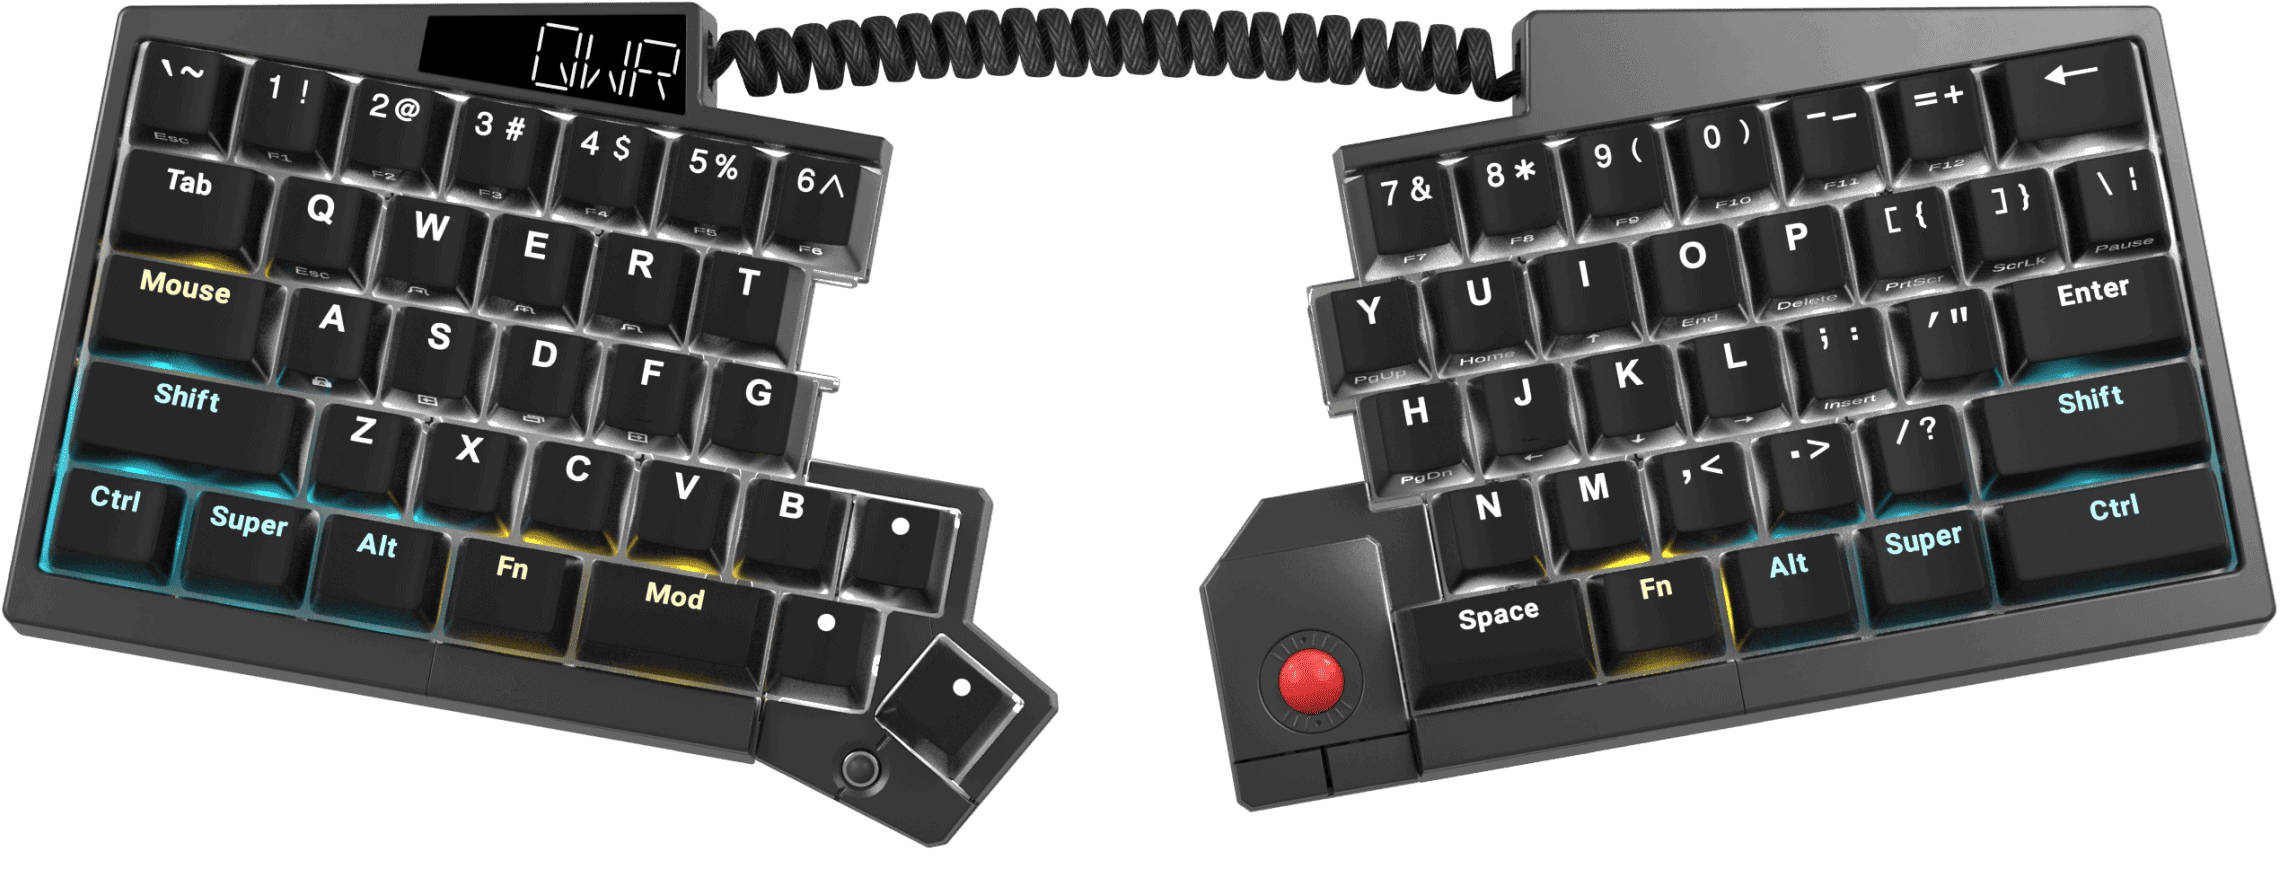 Ultimate Hacking Keyboard - The keyboard. For professionals.